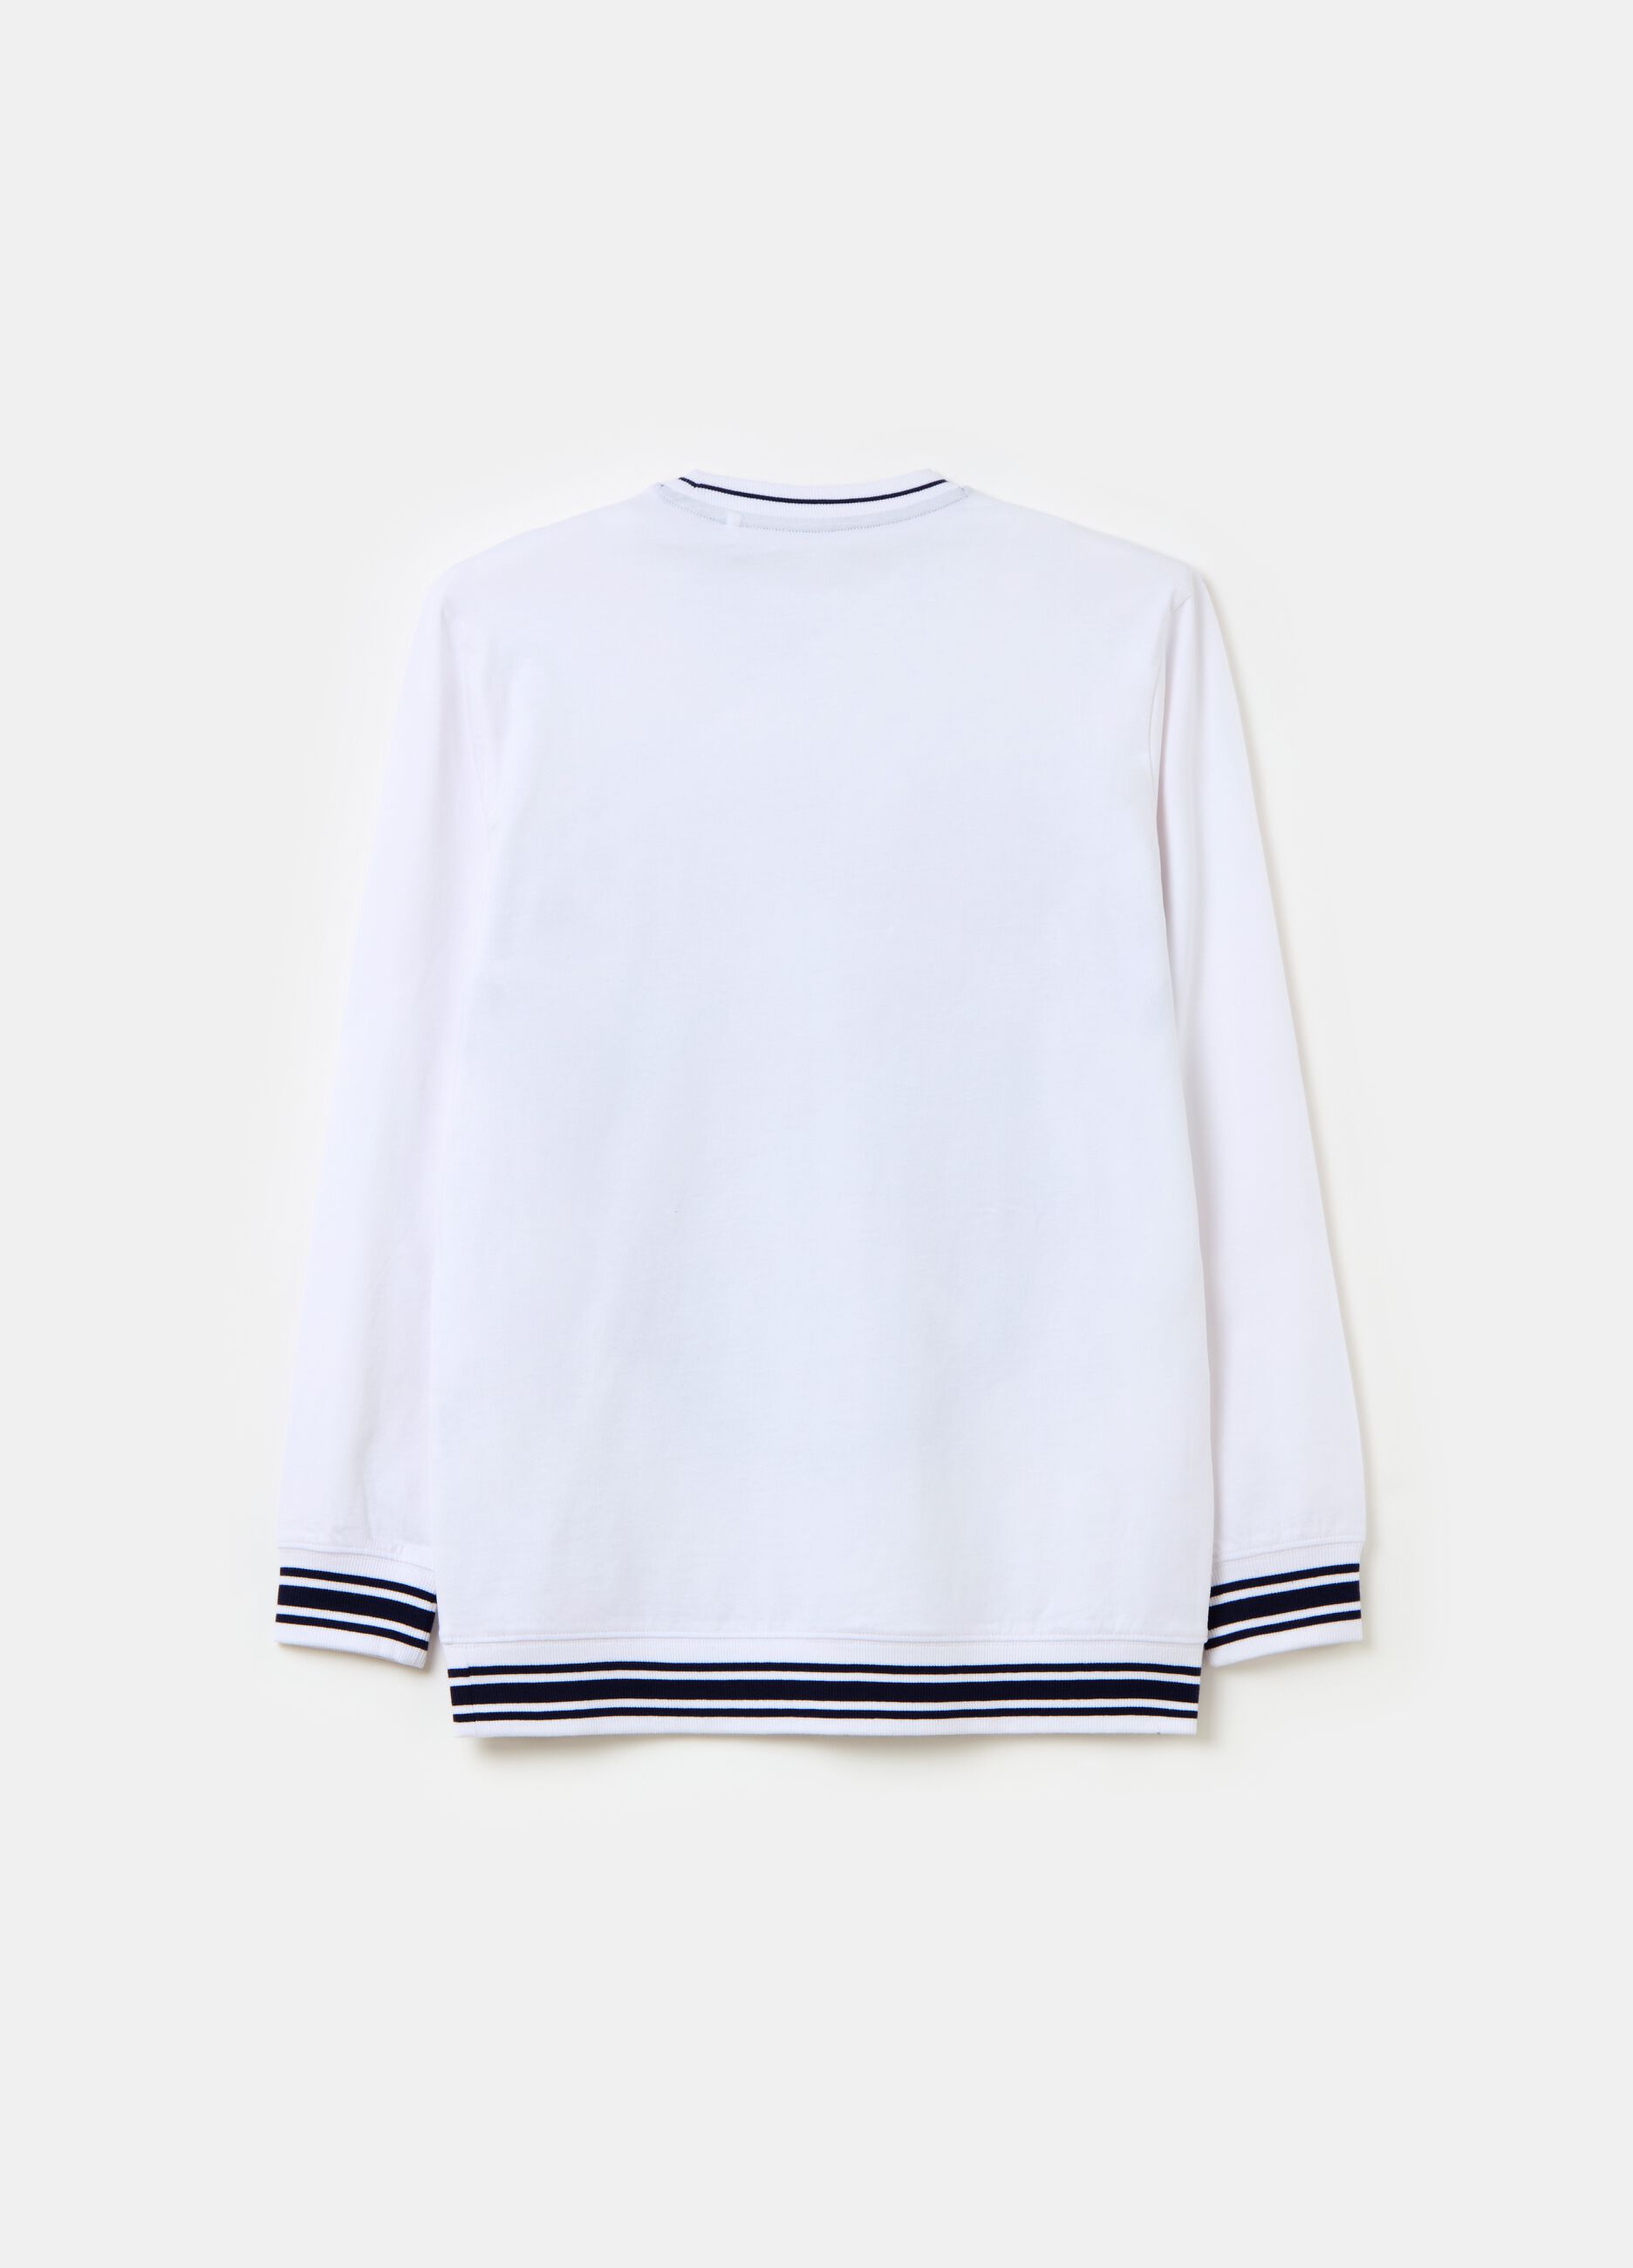 T-shirt with striped edging and college print